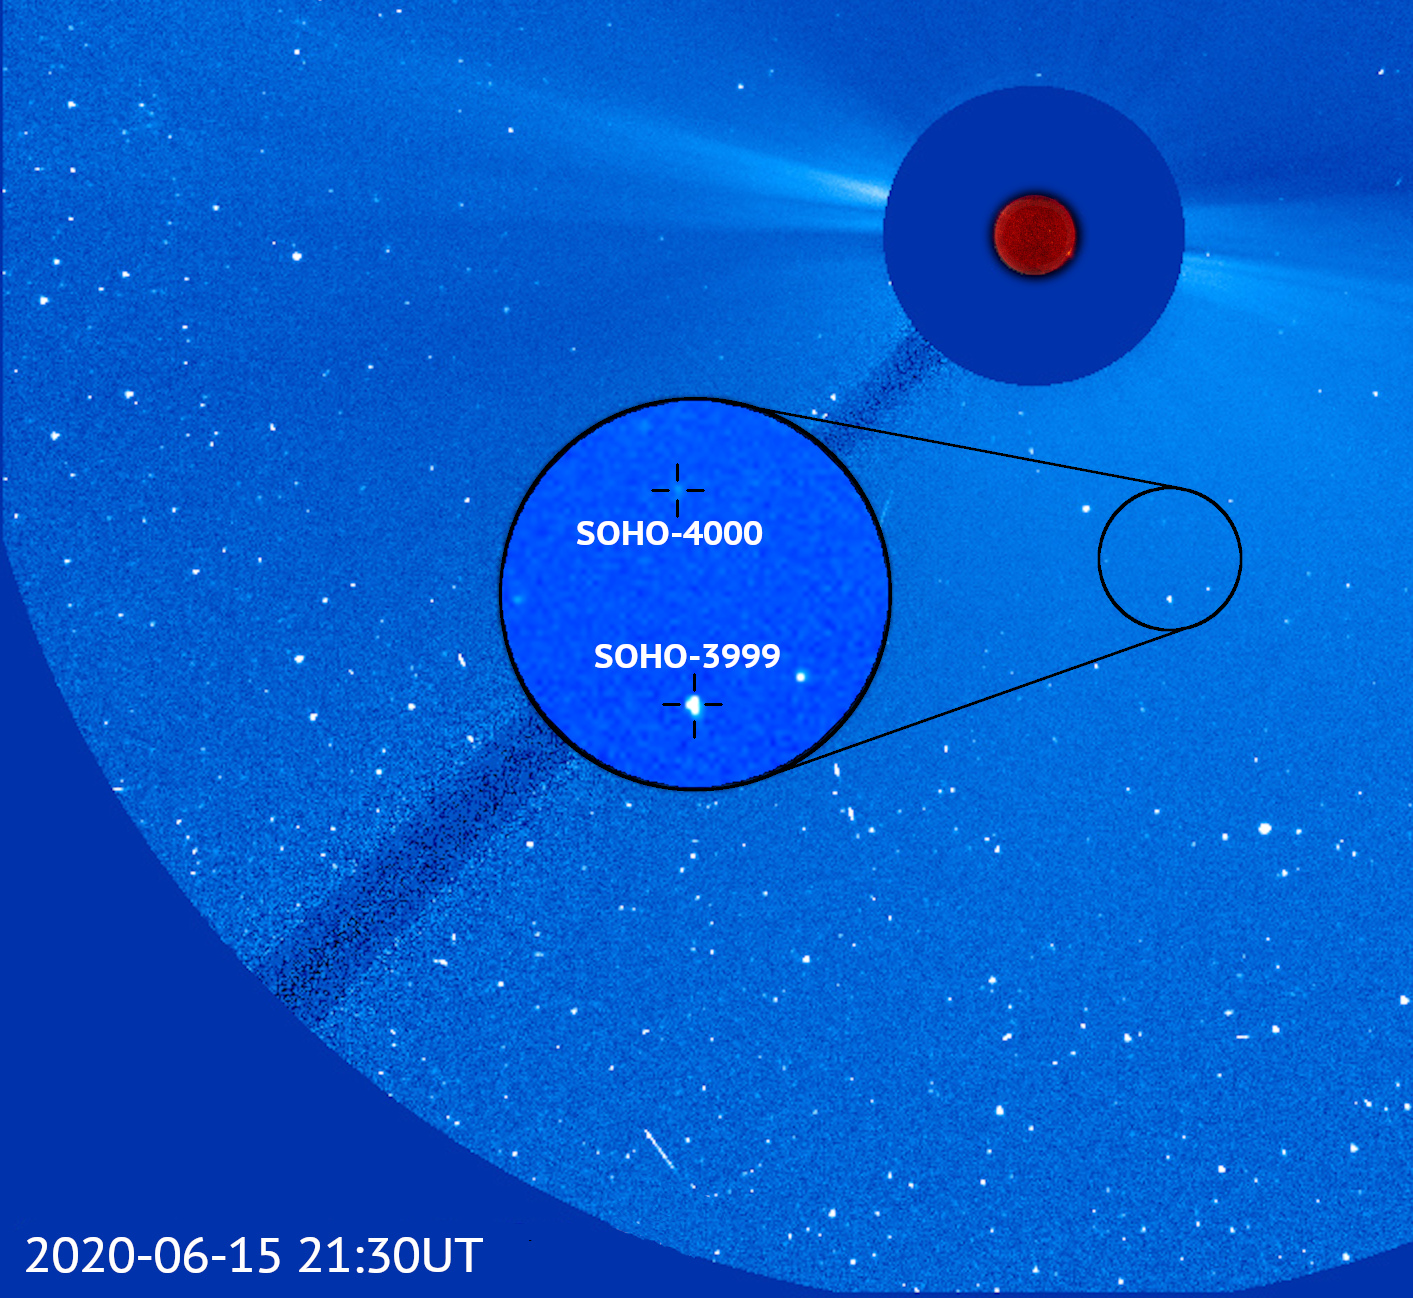 A SOHO image shows space immediately surrounding the Sun, with background stars appearing white against a blue background. A circular inset image below the Sun provides a zoomed-in view of the SOHO-4000 and SOHO-3999 comets, which also appear as white specks.